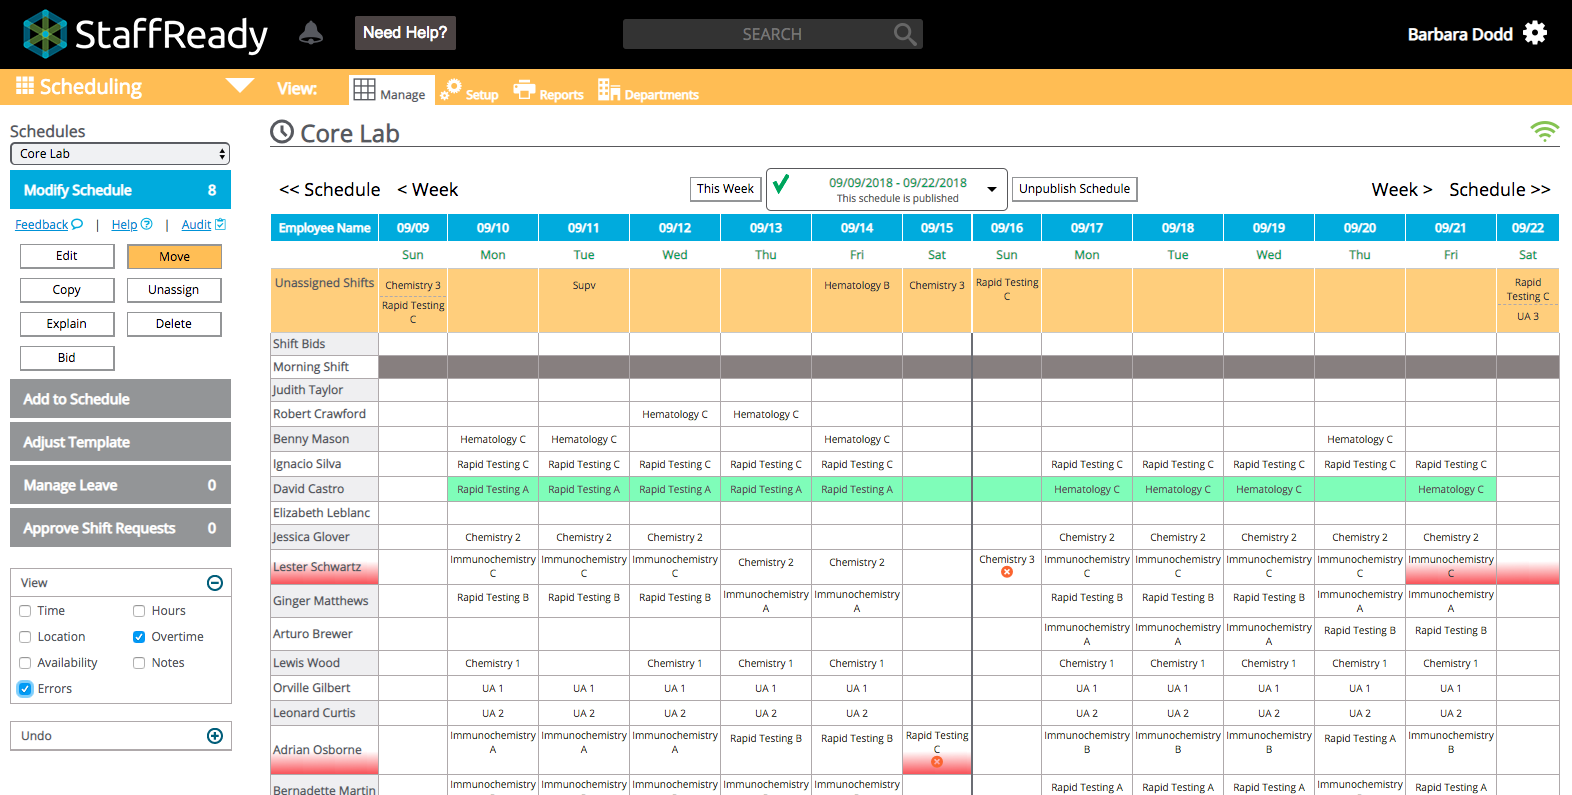 Second view of the StaffReady Manage Grid, featuring the Overtime and Errors indicators.